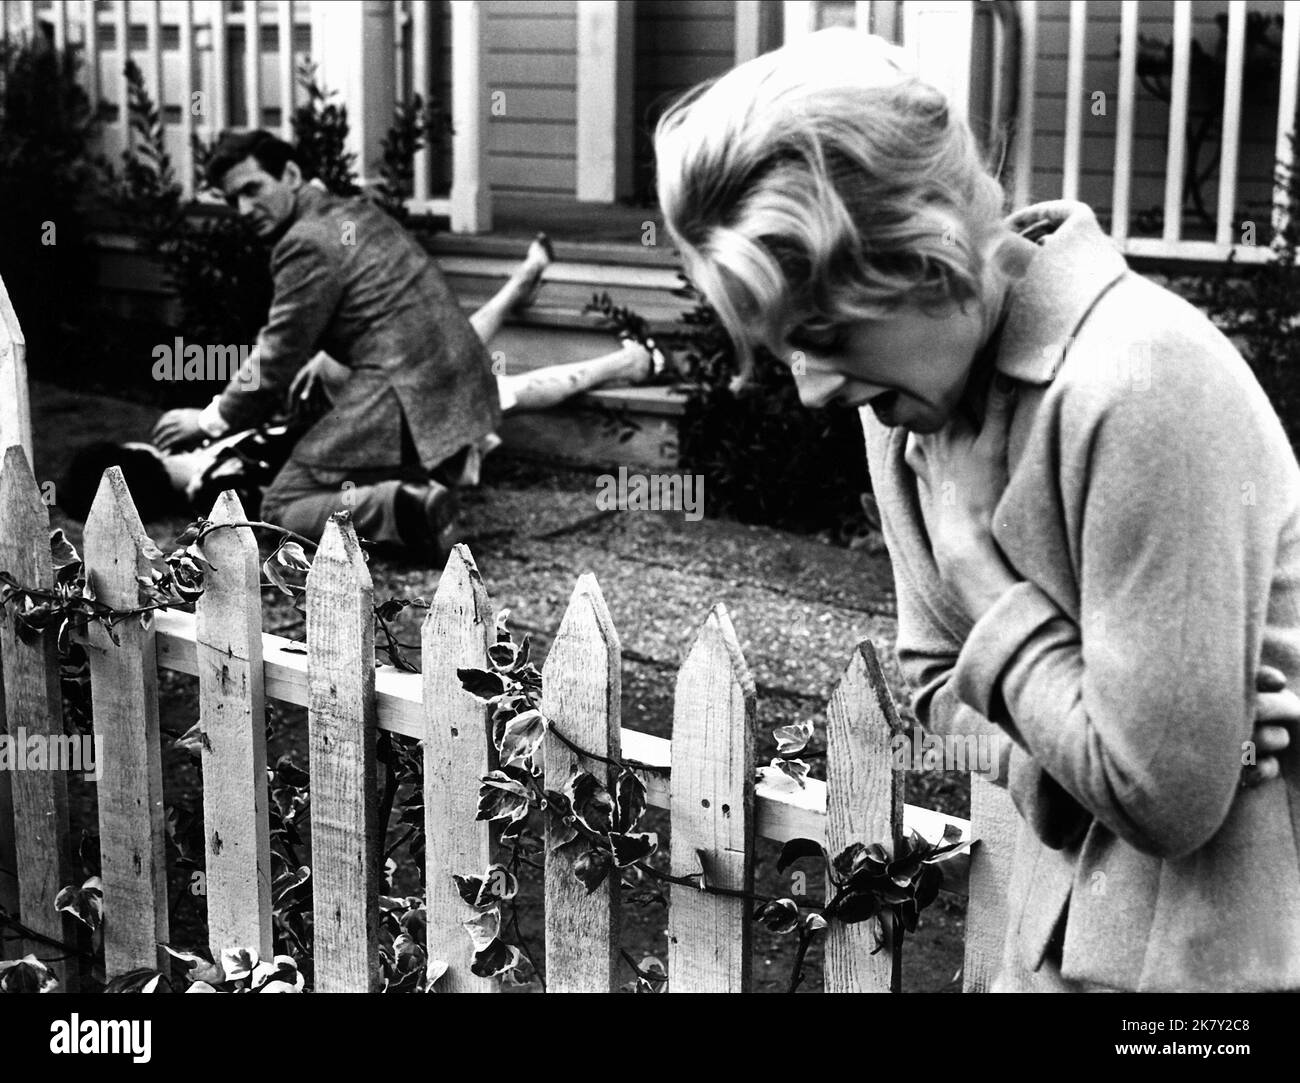 Rod Taylor & Tippi Hedren Film: The Birds (USA 1963) Characters: Mitch ...